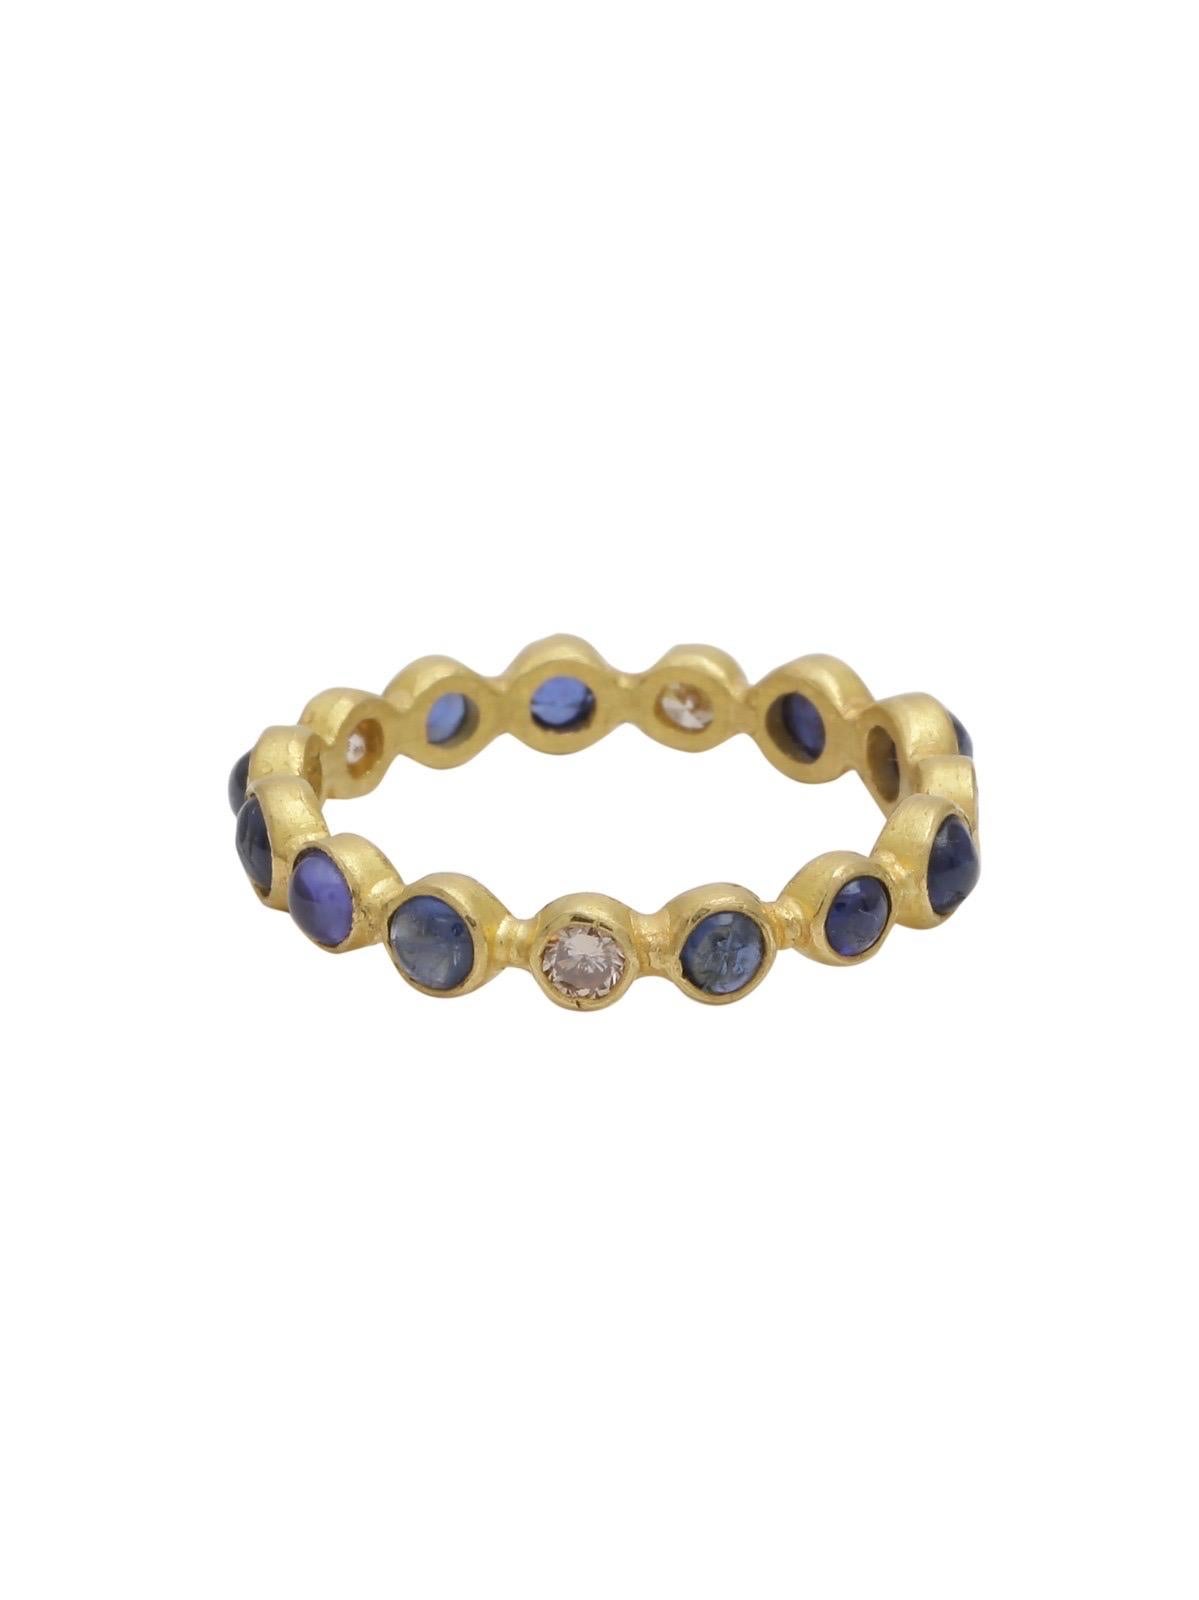 A beautiful Eternity Band made with Blue Sapphire Cabochons and White Diamonds handmade in 22k gold . 
The stackable ring can be born as is or paired with different colours or your existing bands .

The Ring has 11 vibrant sapphire cabochons